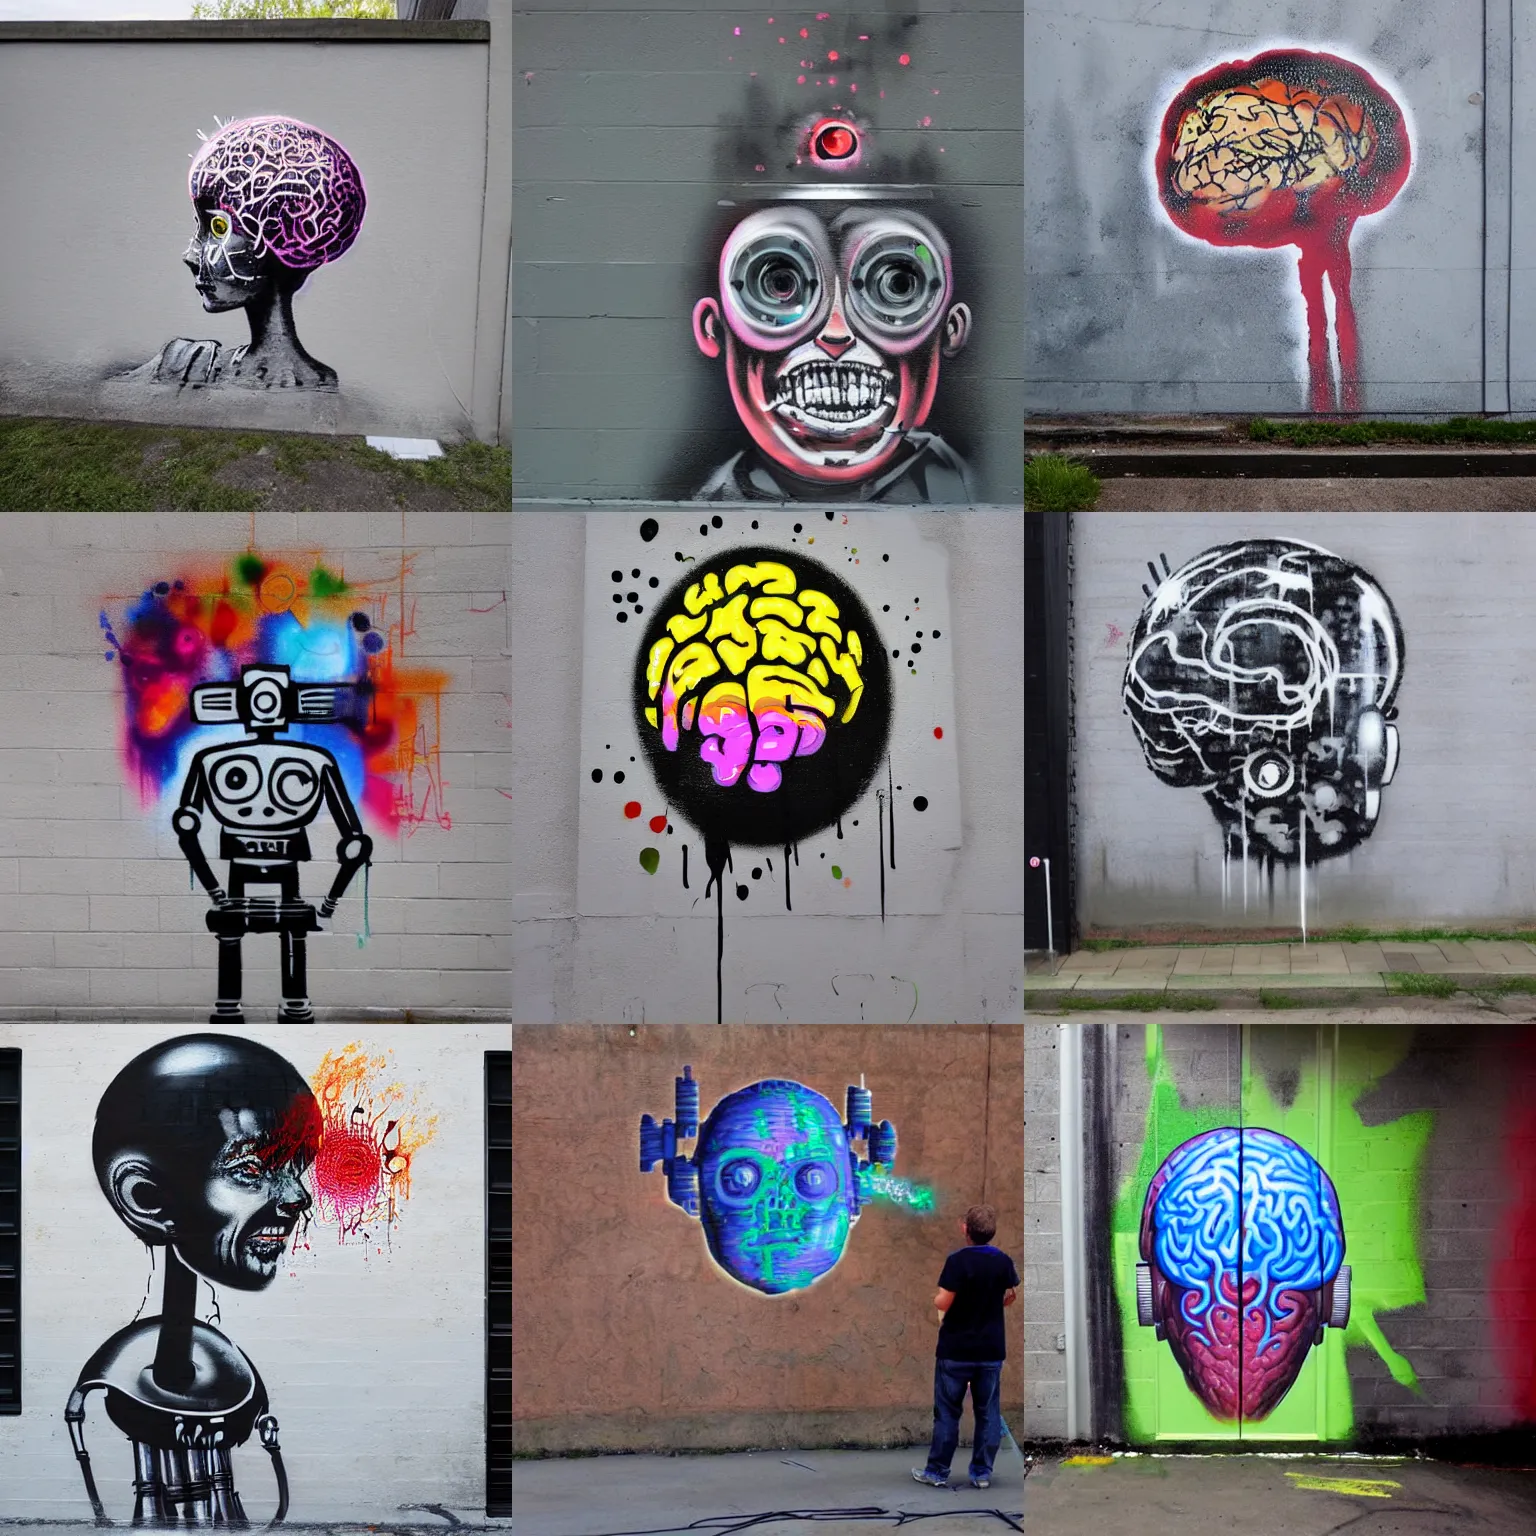 Prompt: Spray painting of a robot painting an image of a human brain onto a wall, dripping paint, in the style of Banksy